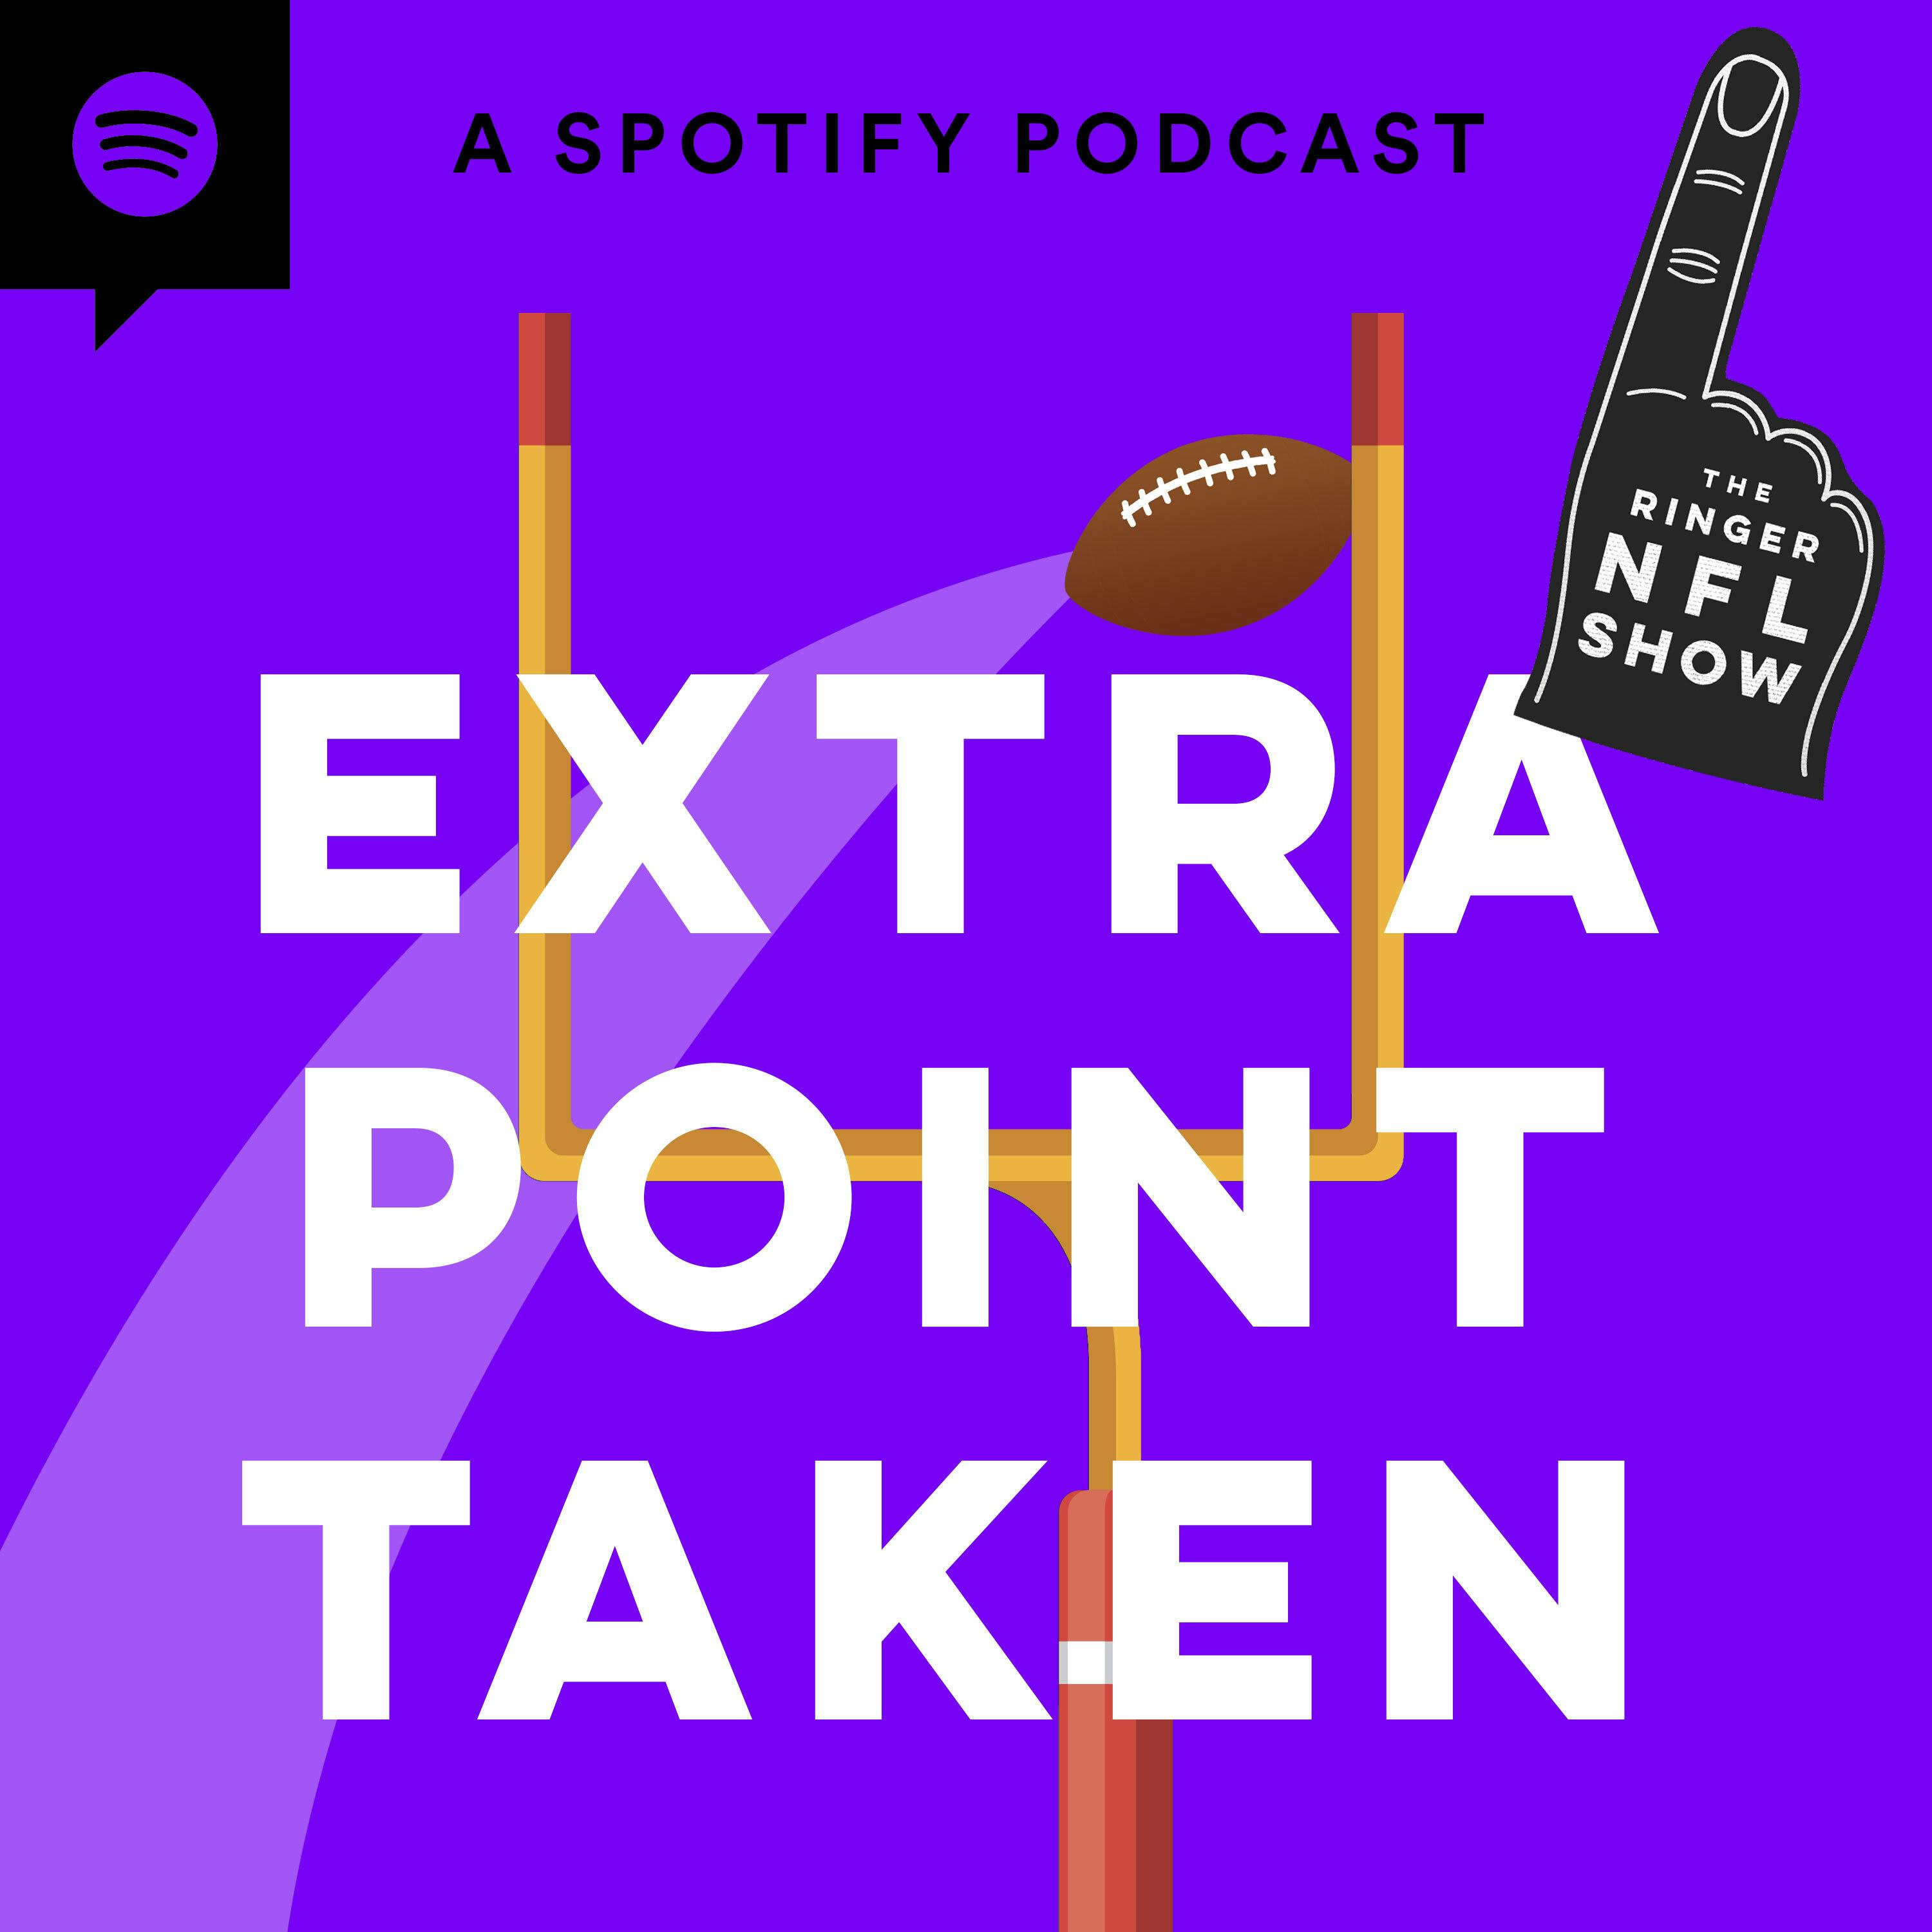 Which Loss Was the Most Devastating on ‘MNF’? Plus, the Patrick Mahomes Outburst and More Big Takeaways from Week 14 | Extra Point Taken